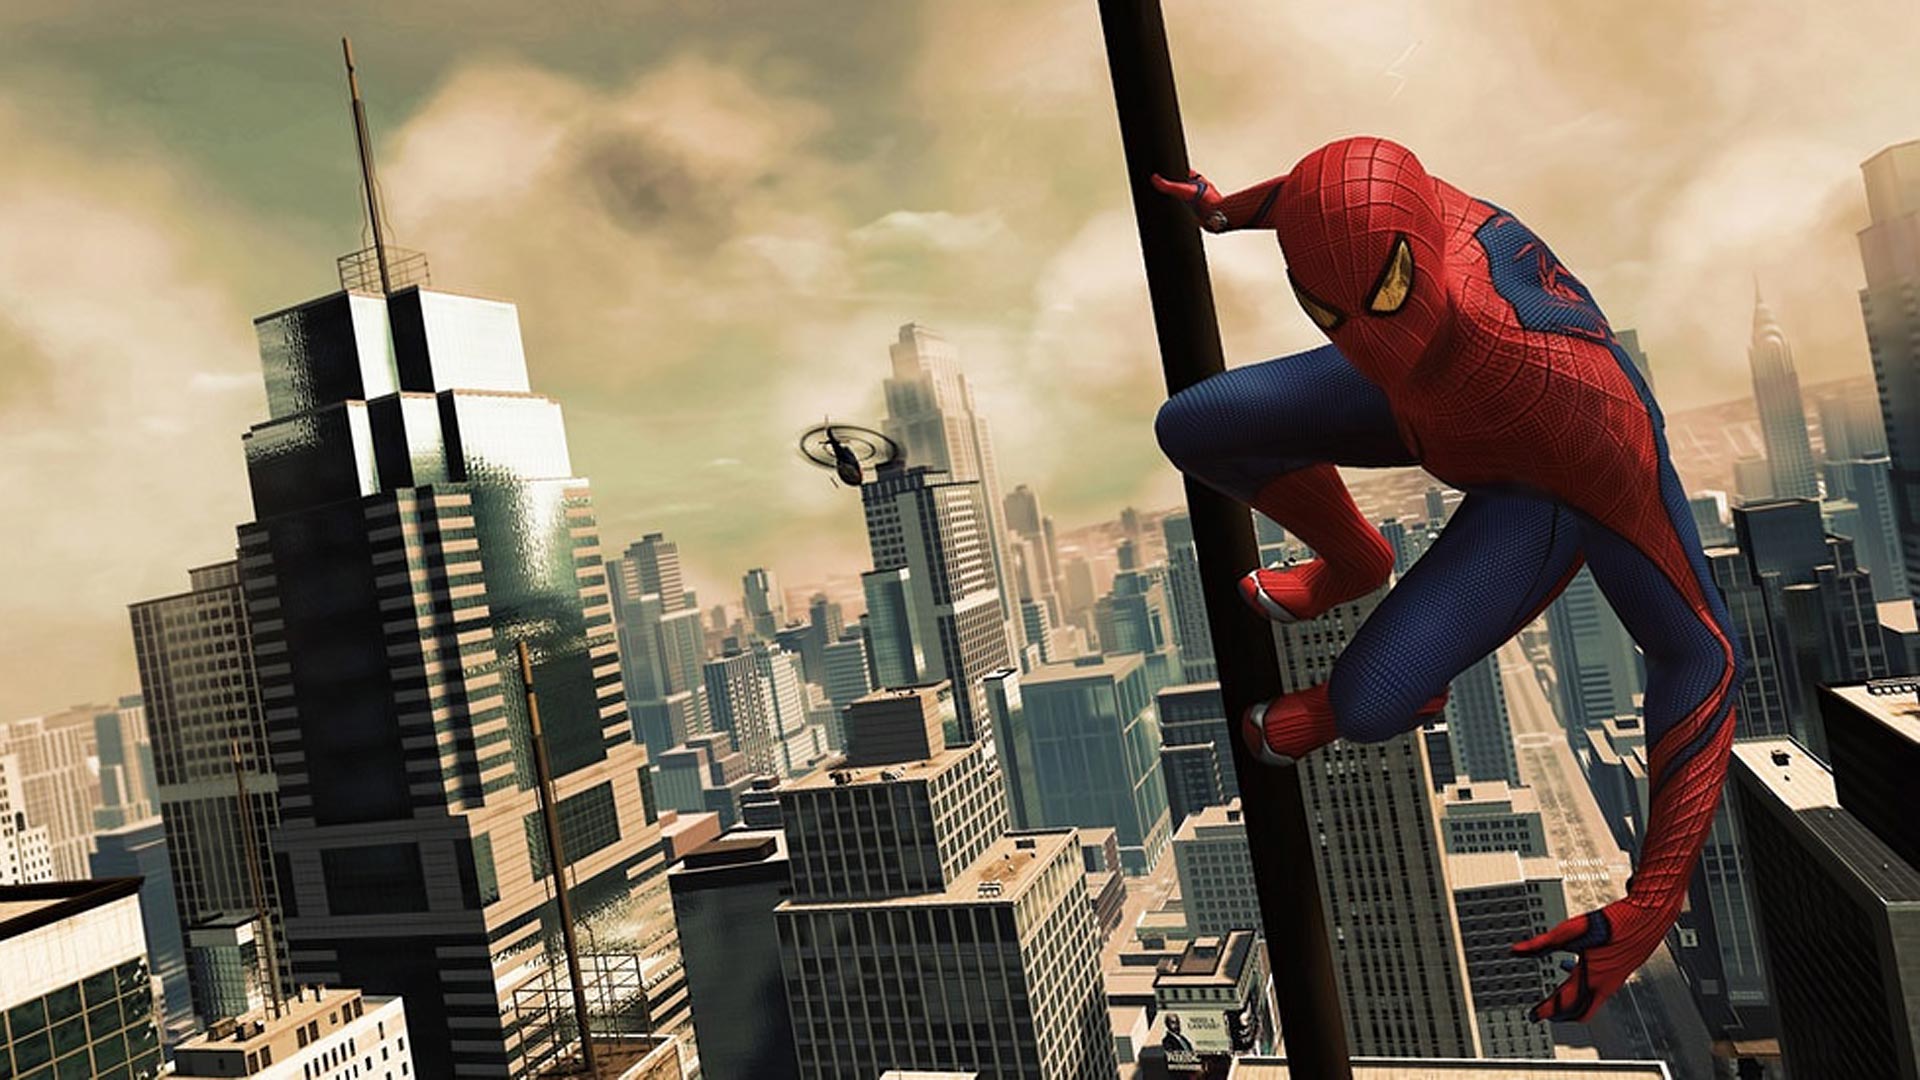 The amazing spider man hd wallpaper wallpapers55.com - Best